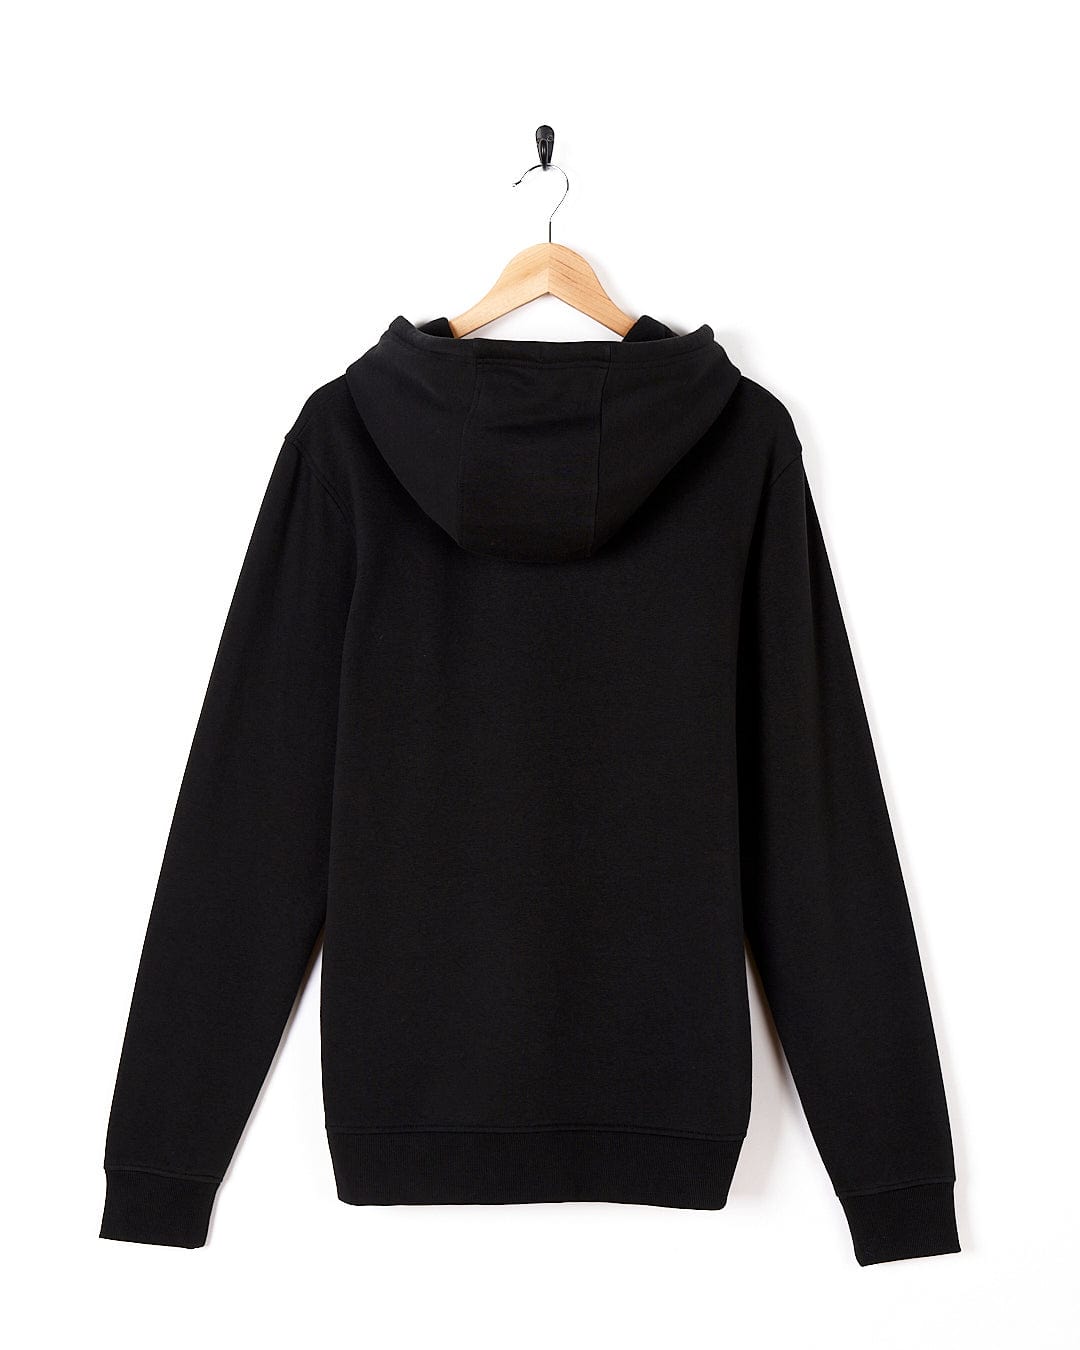 A Poolside - Mens Pop Hoodie - Black by Saltrock hanging on a white wall.